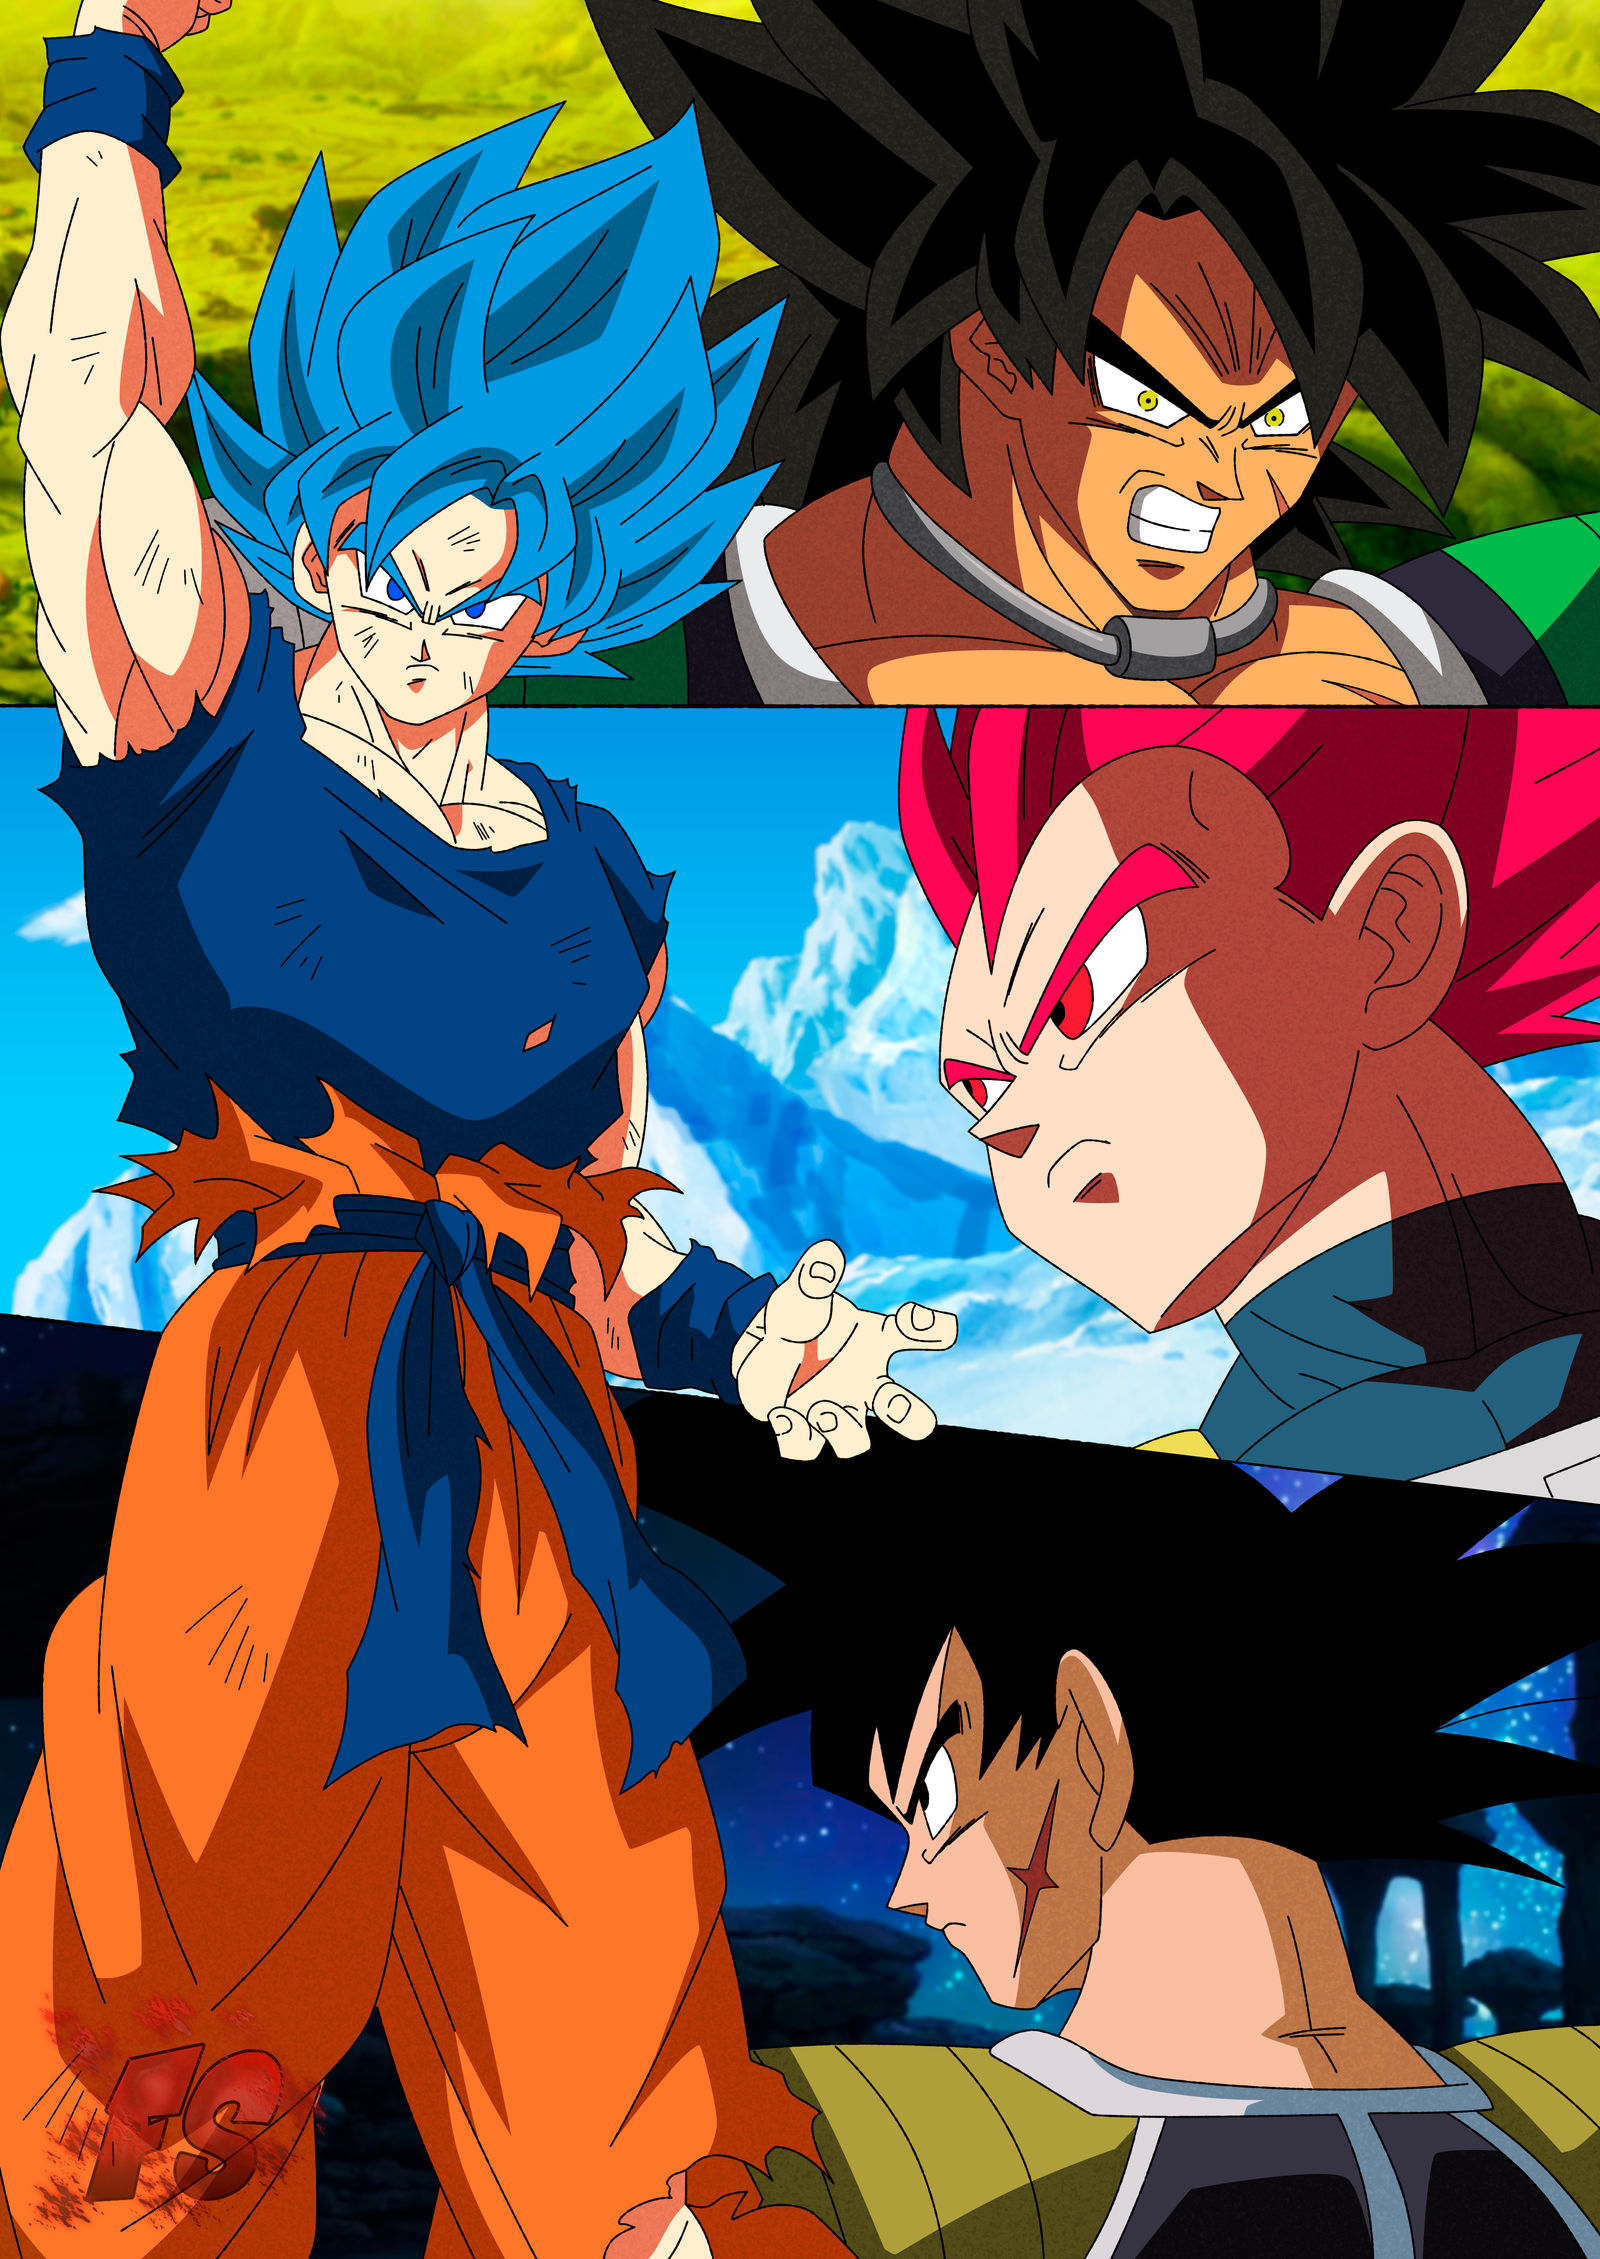 Dragon ball Super ''BROLY'' - Poster by FradayEsmarkers on DeviantArt